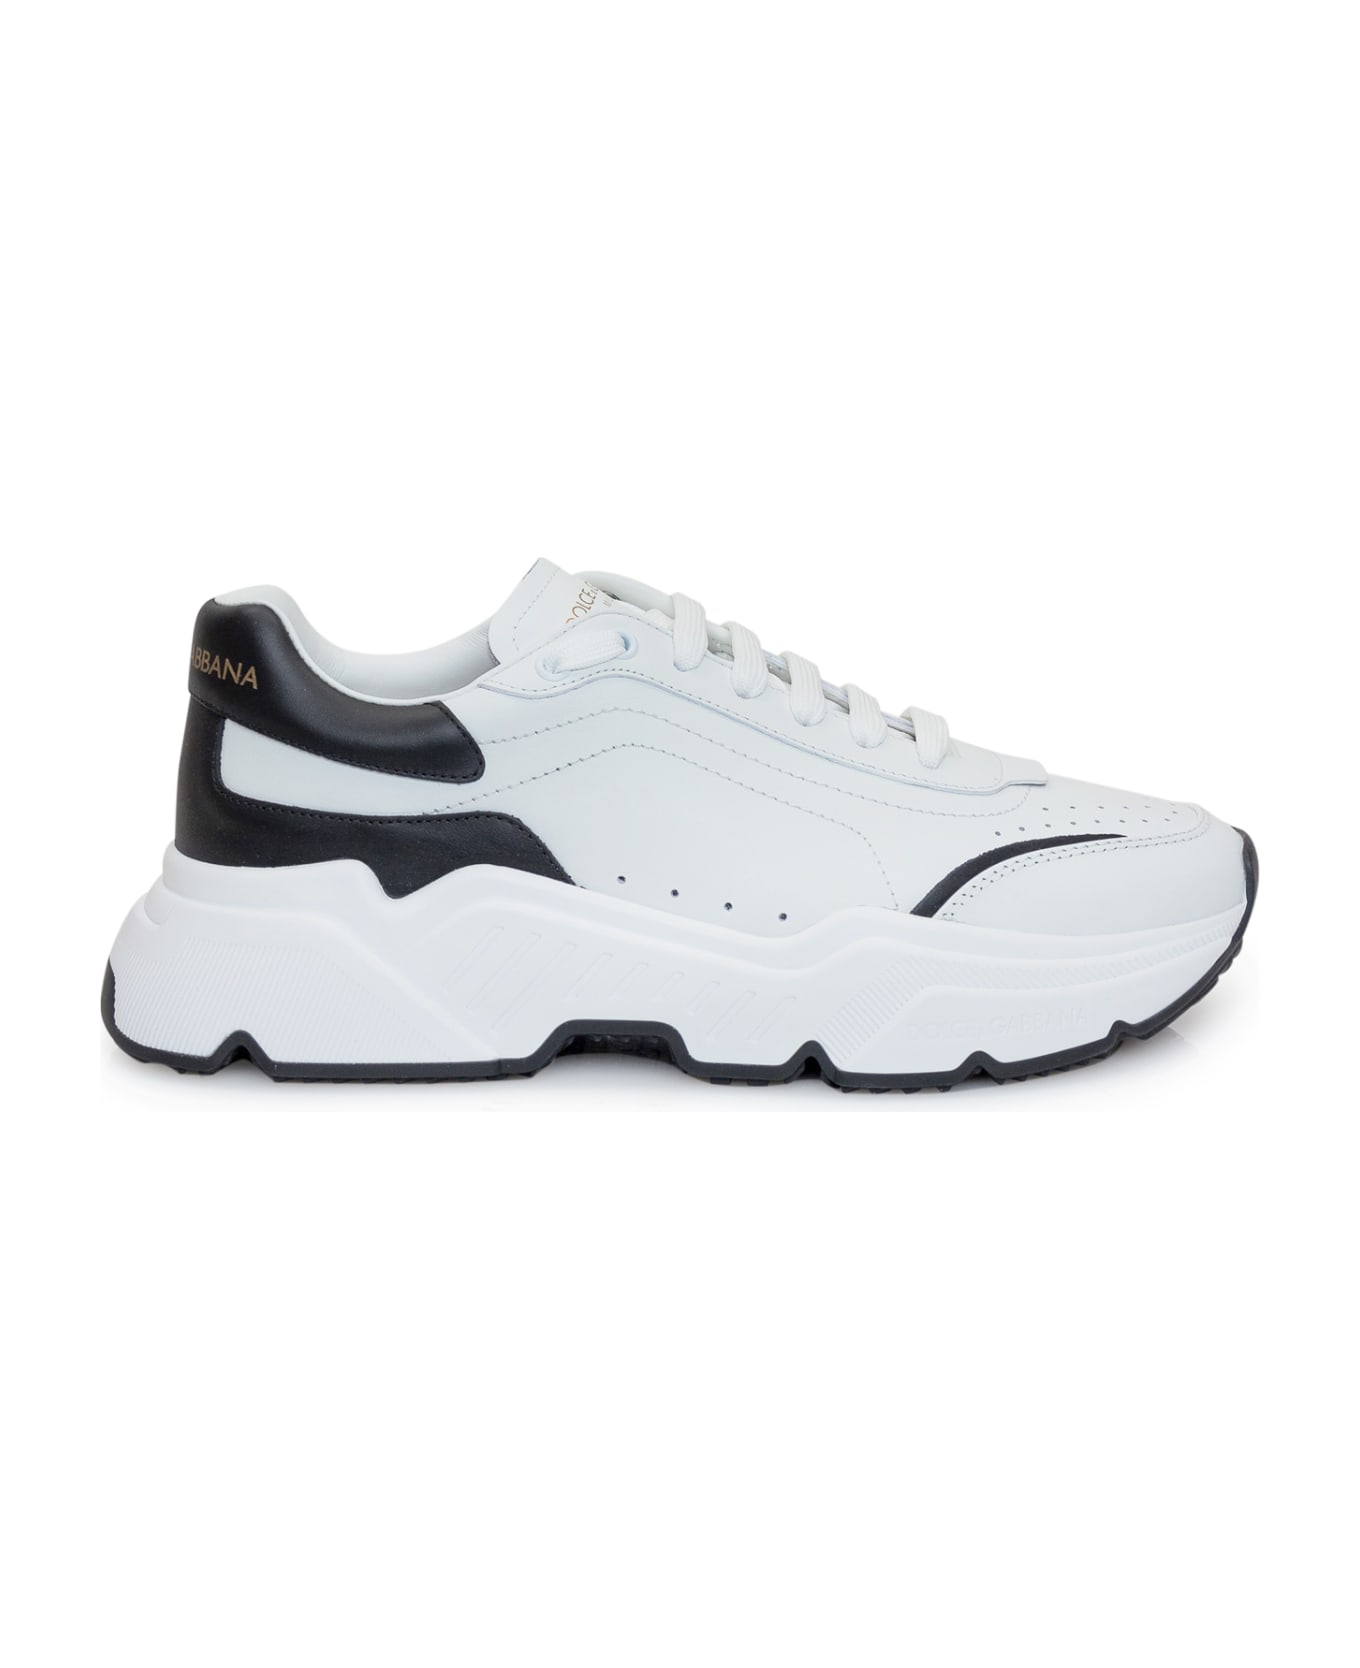 Dolce & Gabbana Daymaster Sneakers - White